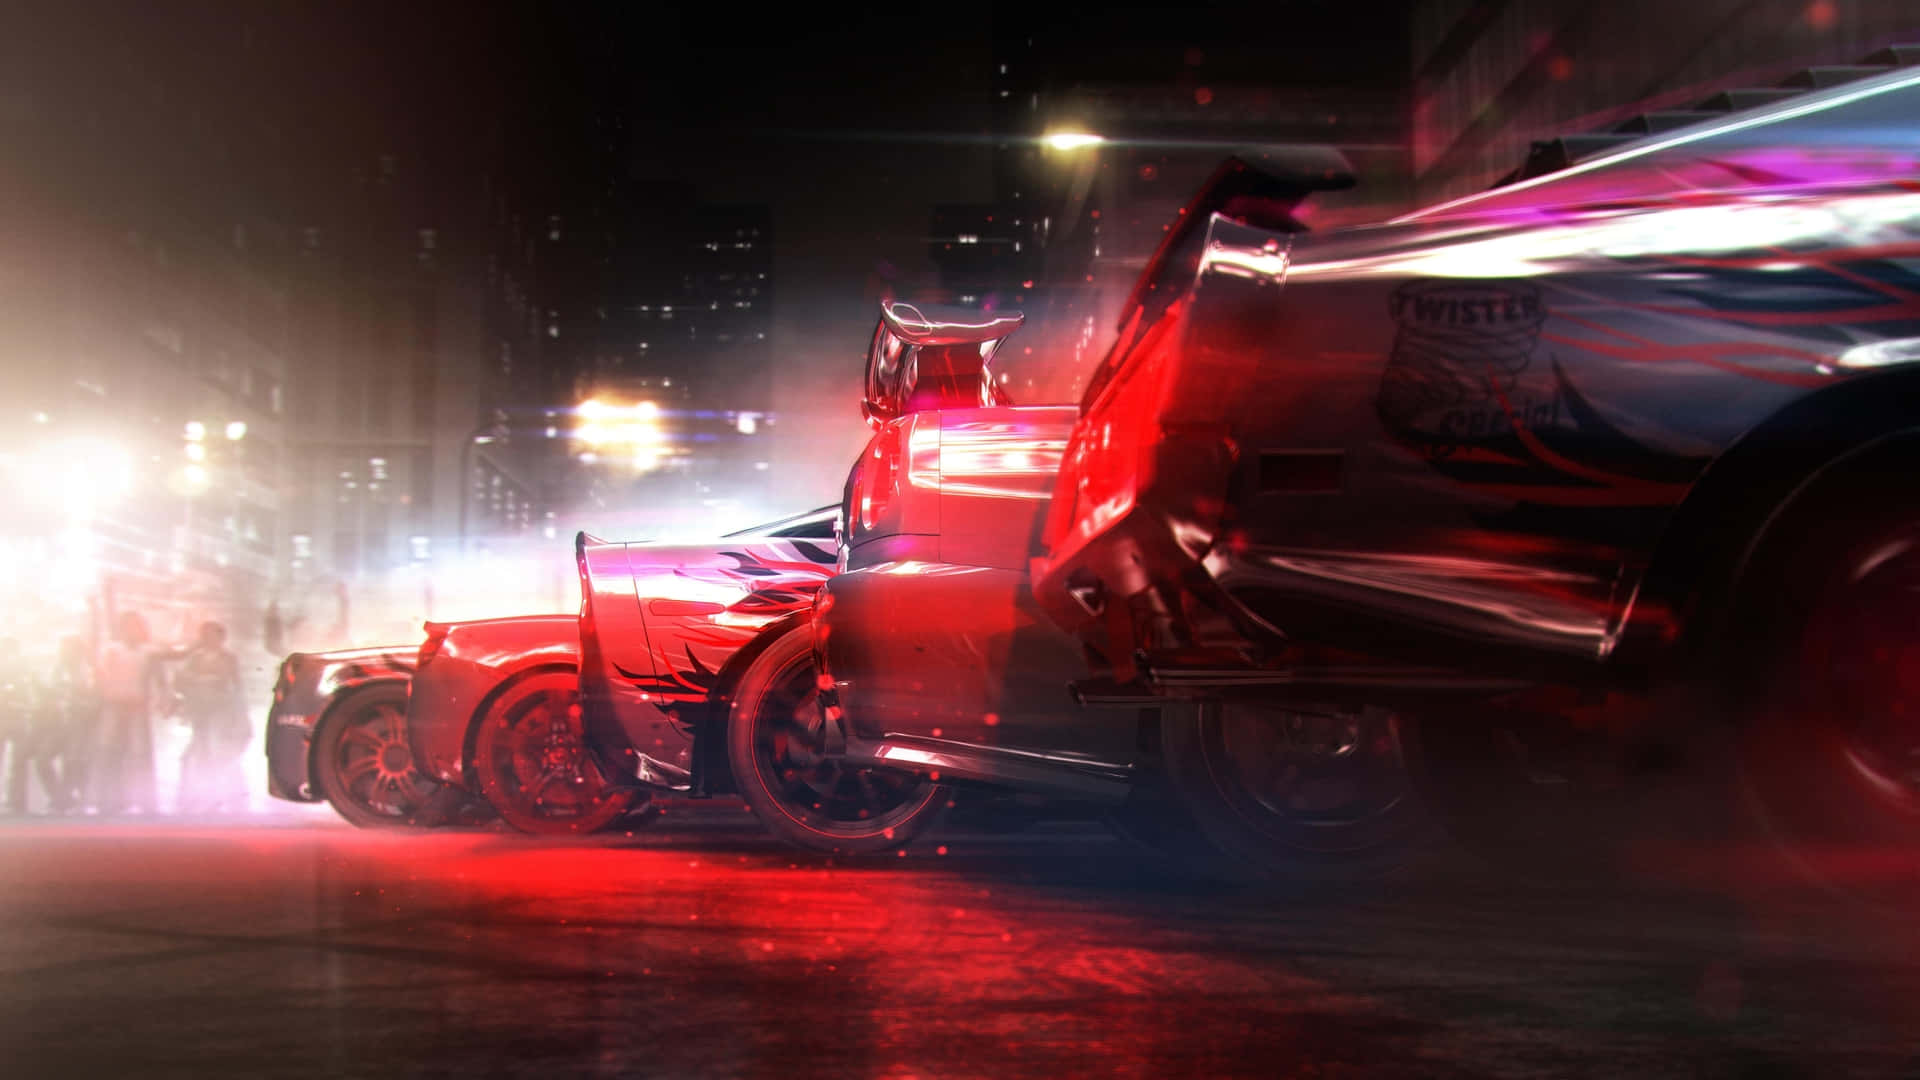 Hd Grid 2 Background Cars Lined Up Red Tones